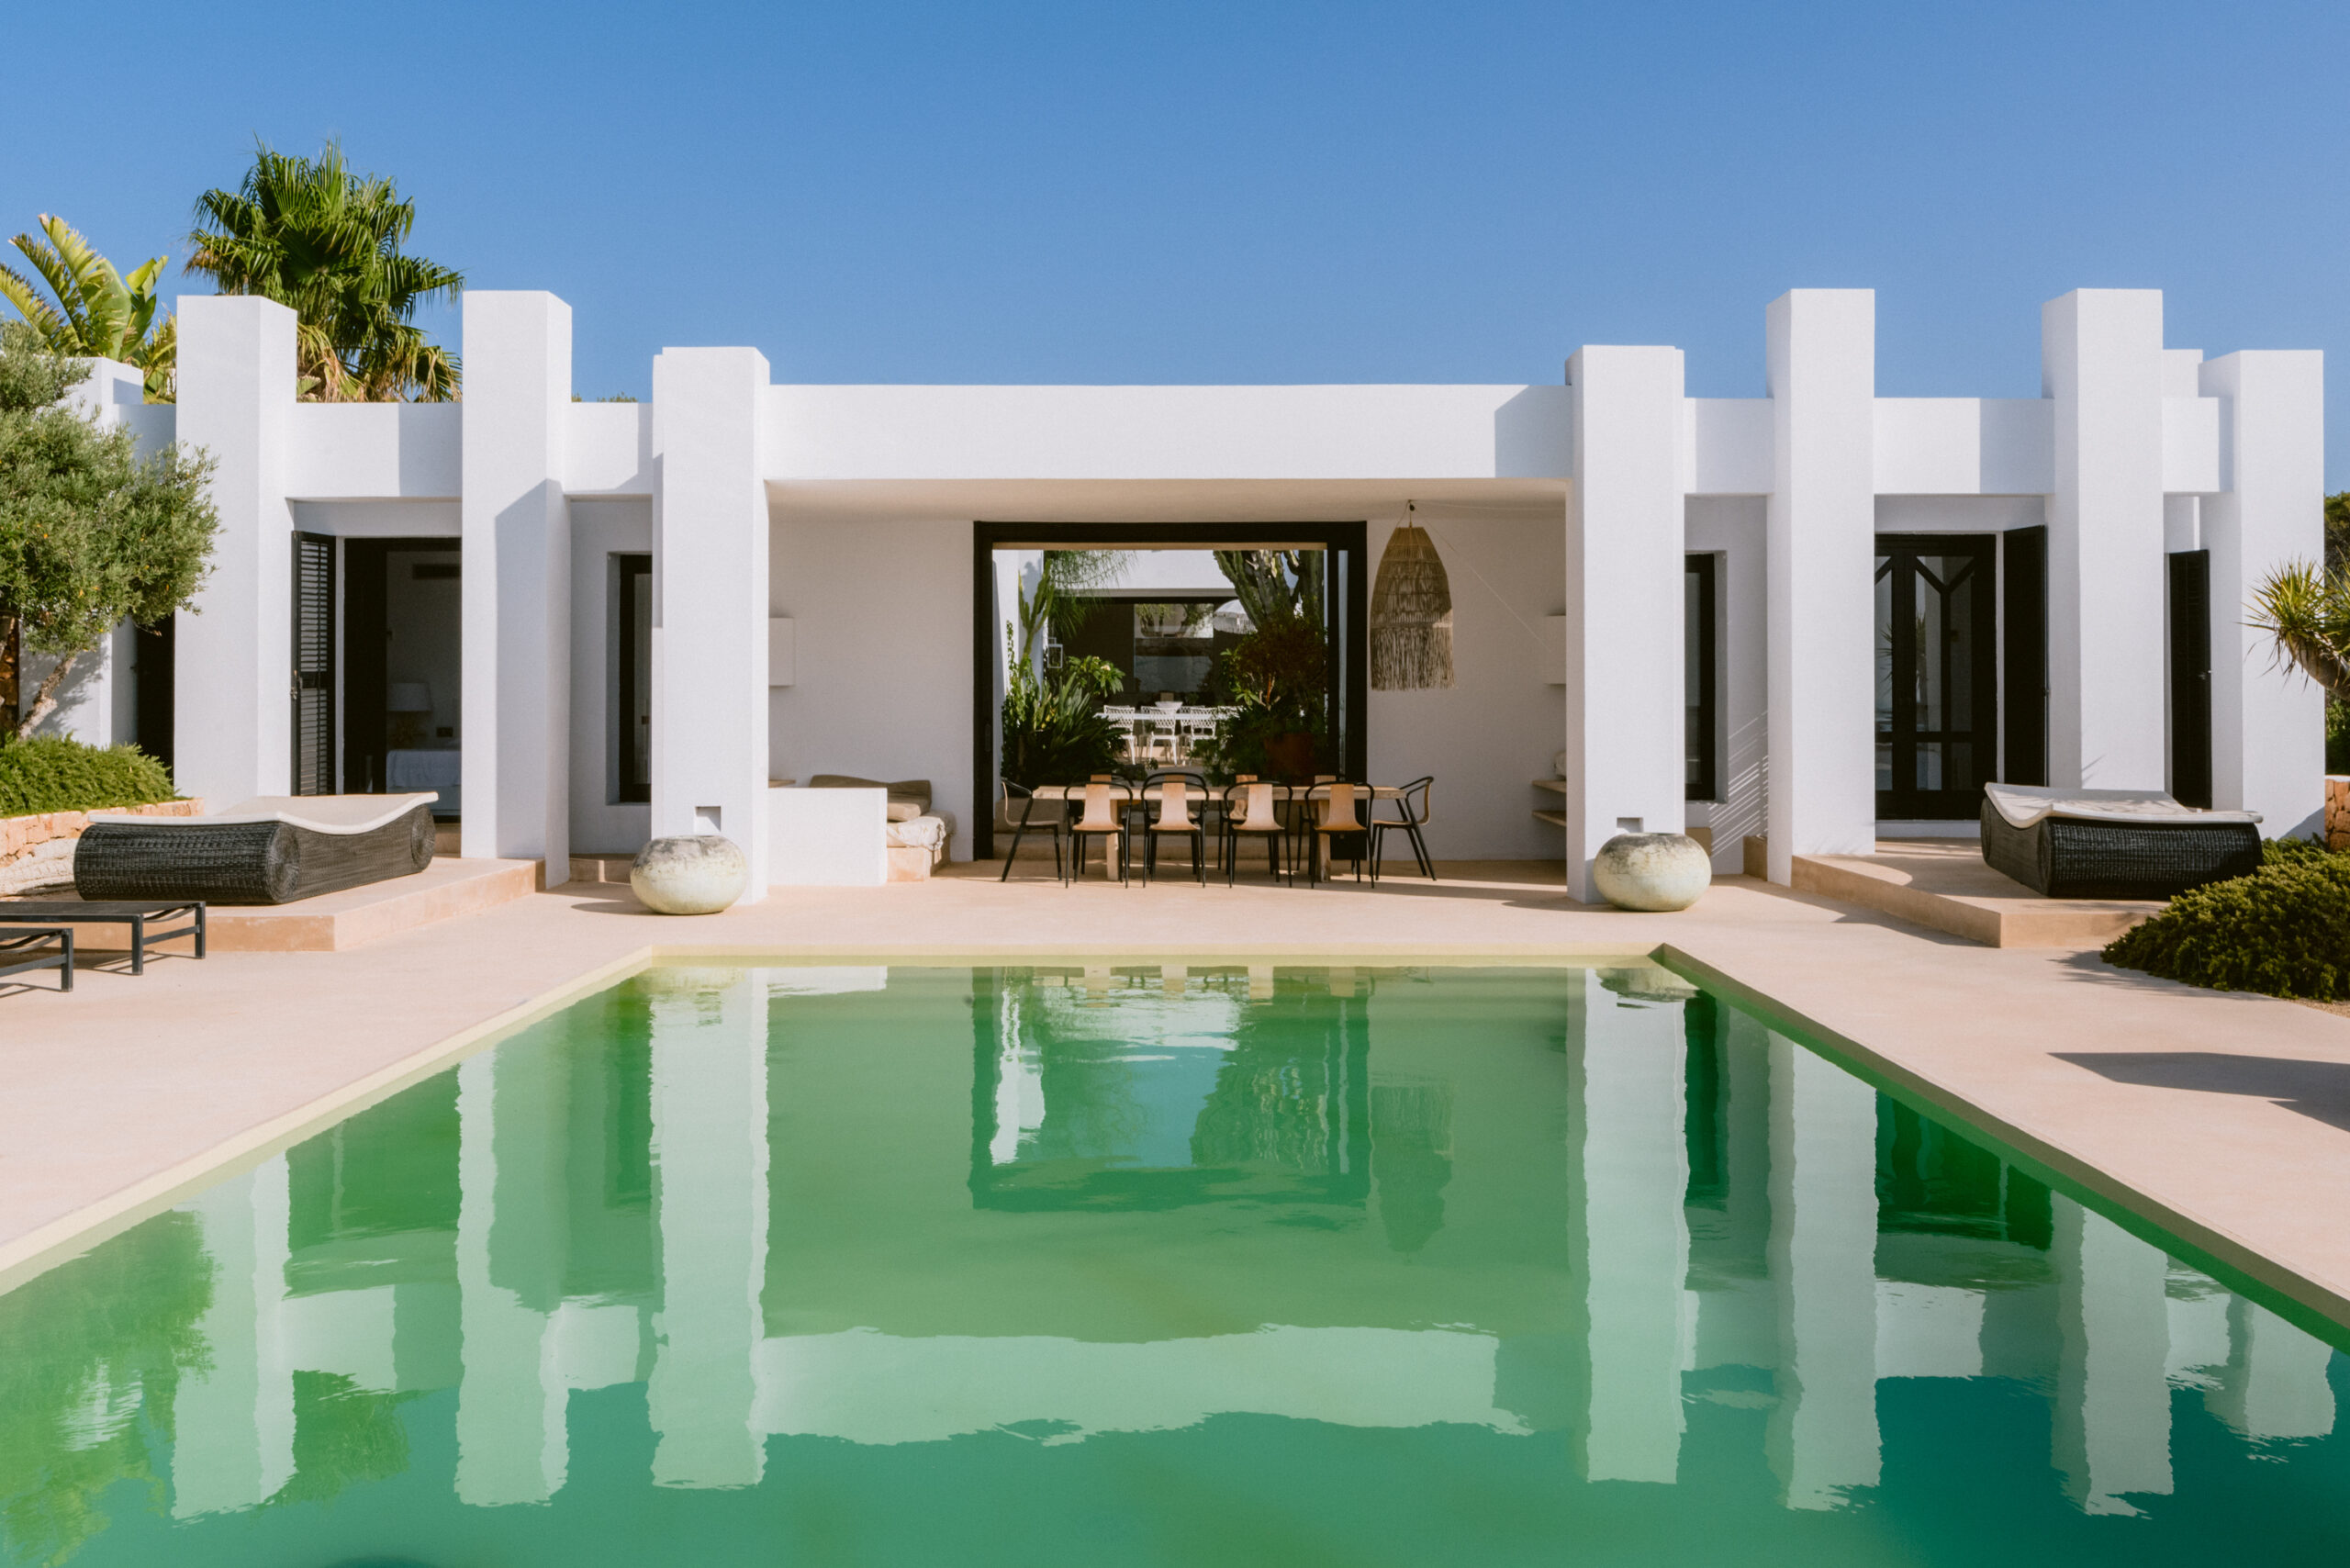 Eye-catching André Jacqmain villa for sale, reflected in its expansive pool